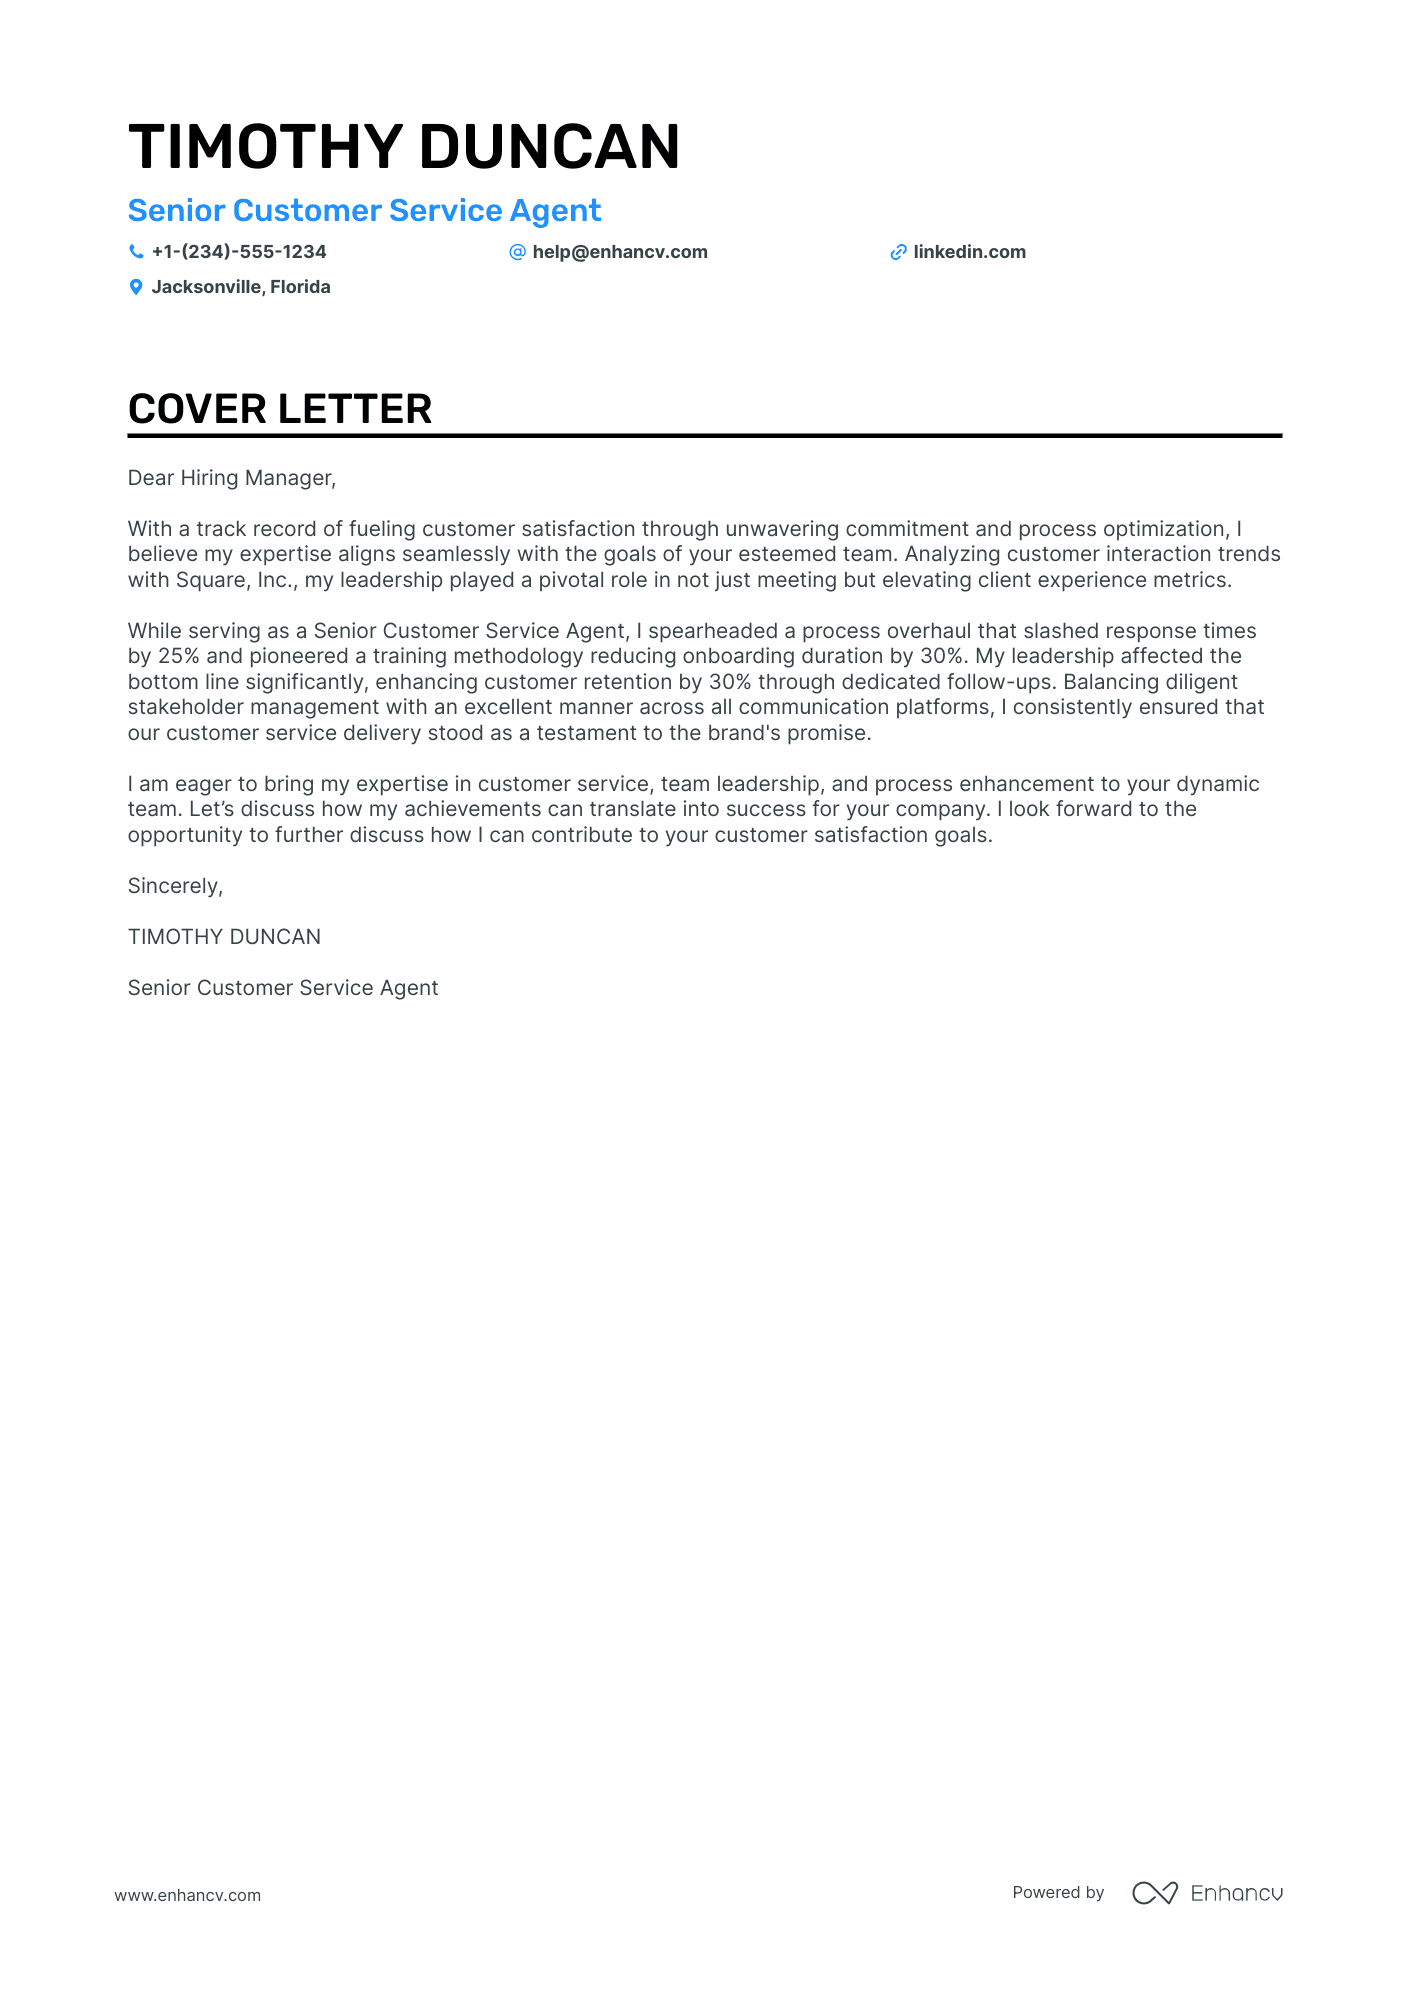 Customer Service Agent cover letter